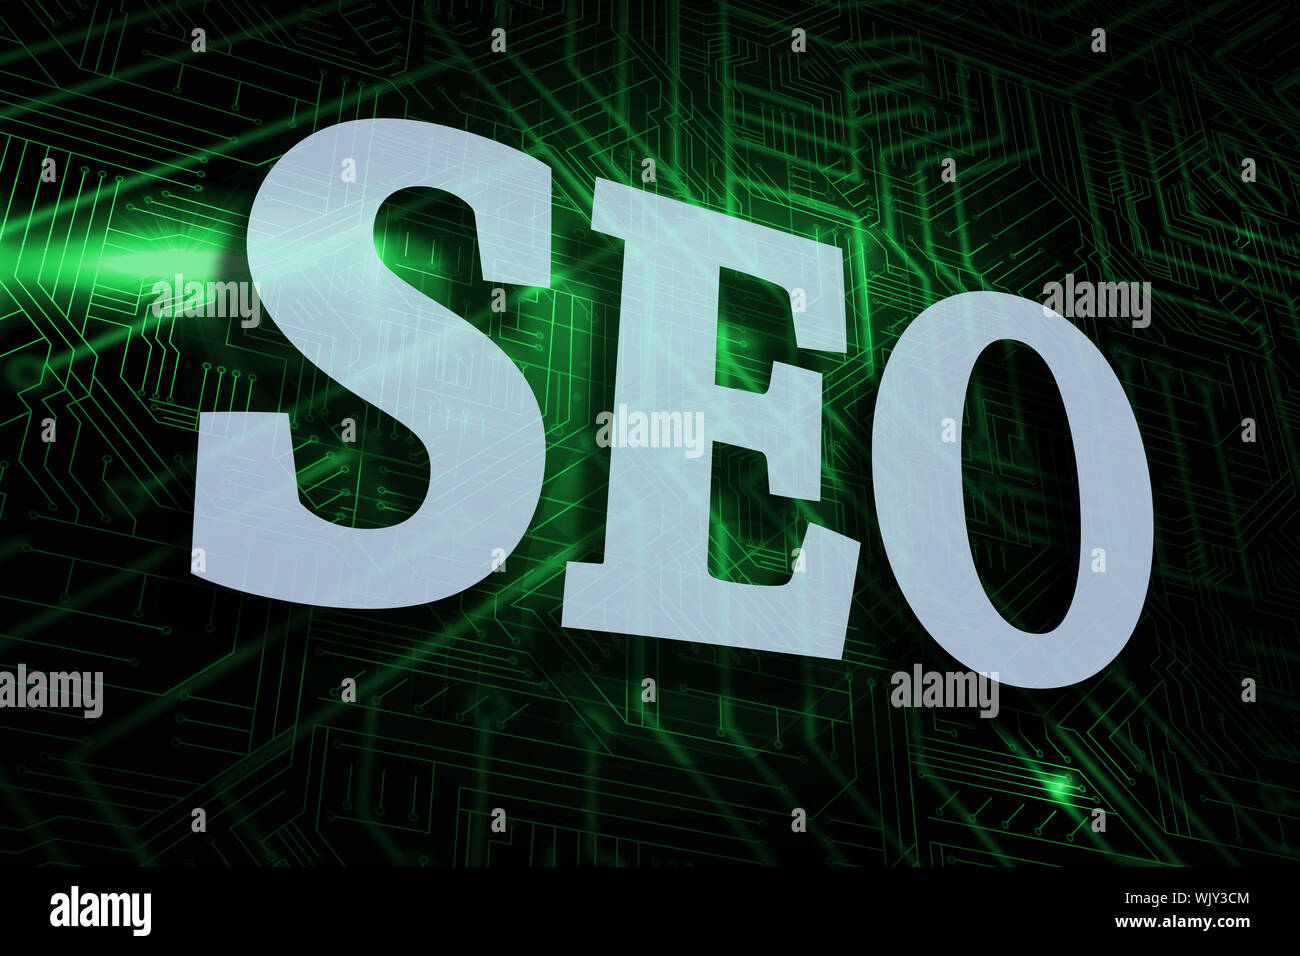 The word seo against green and black circuit board Stock Photo